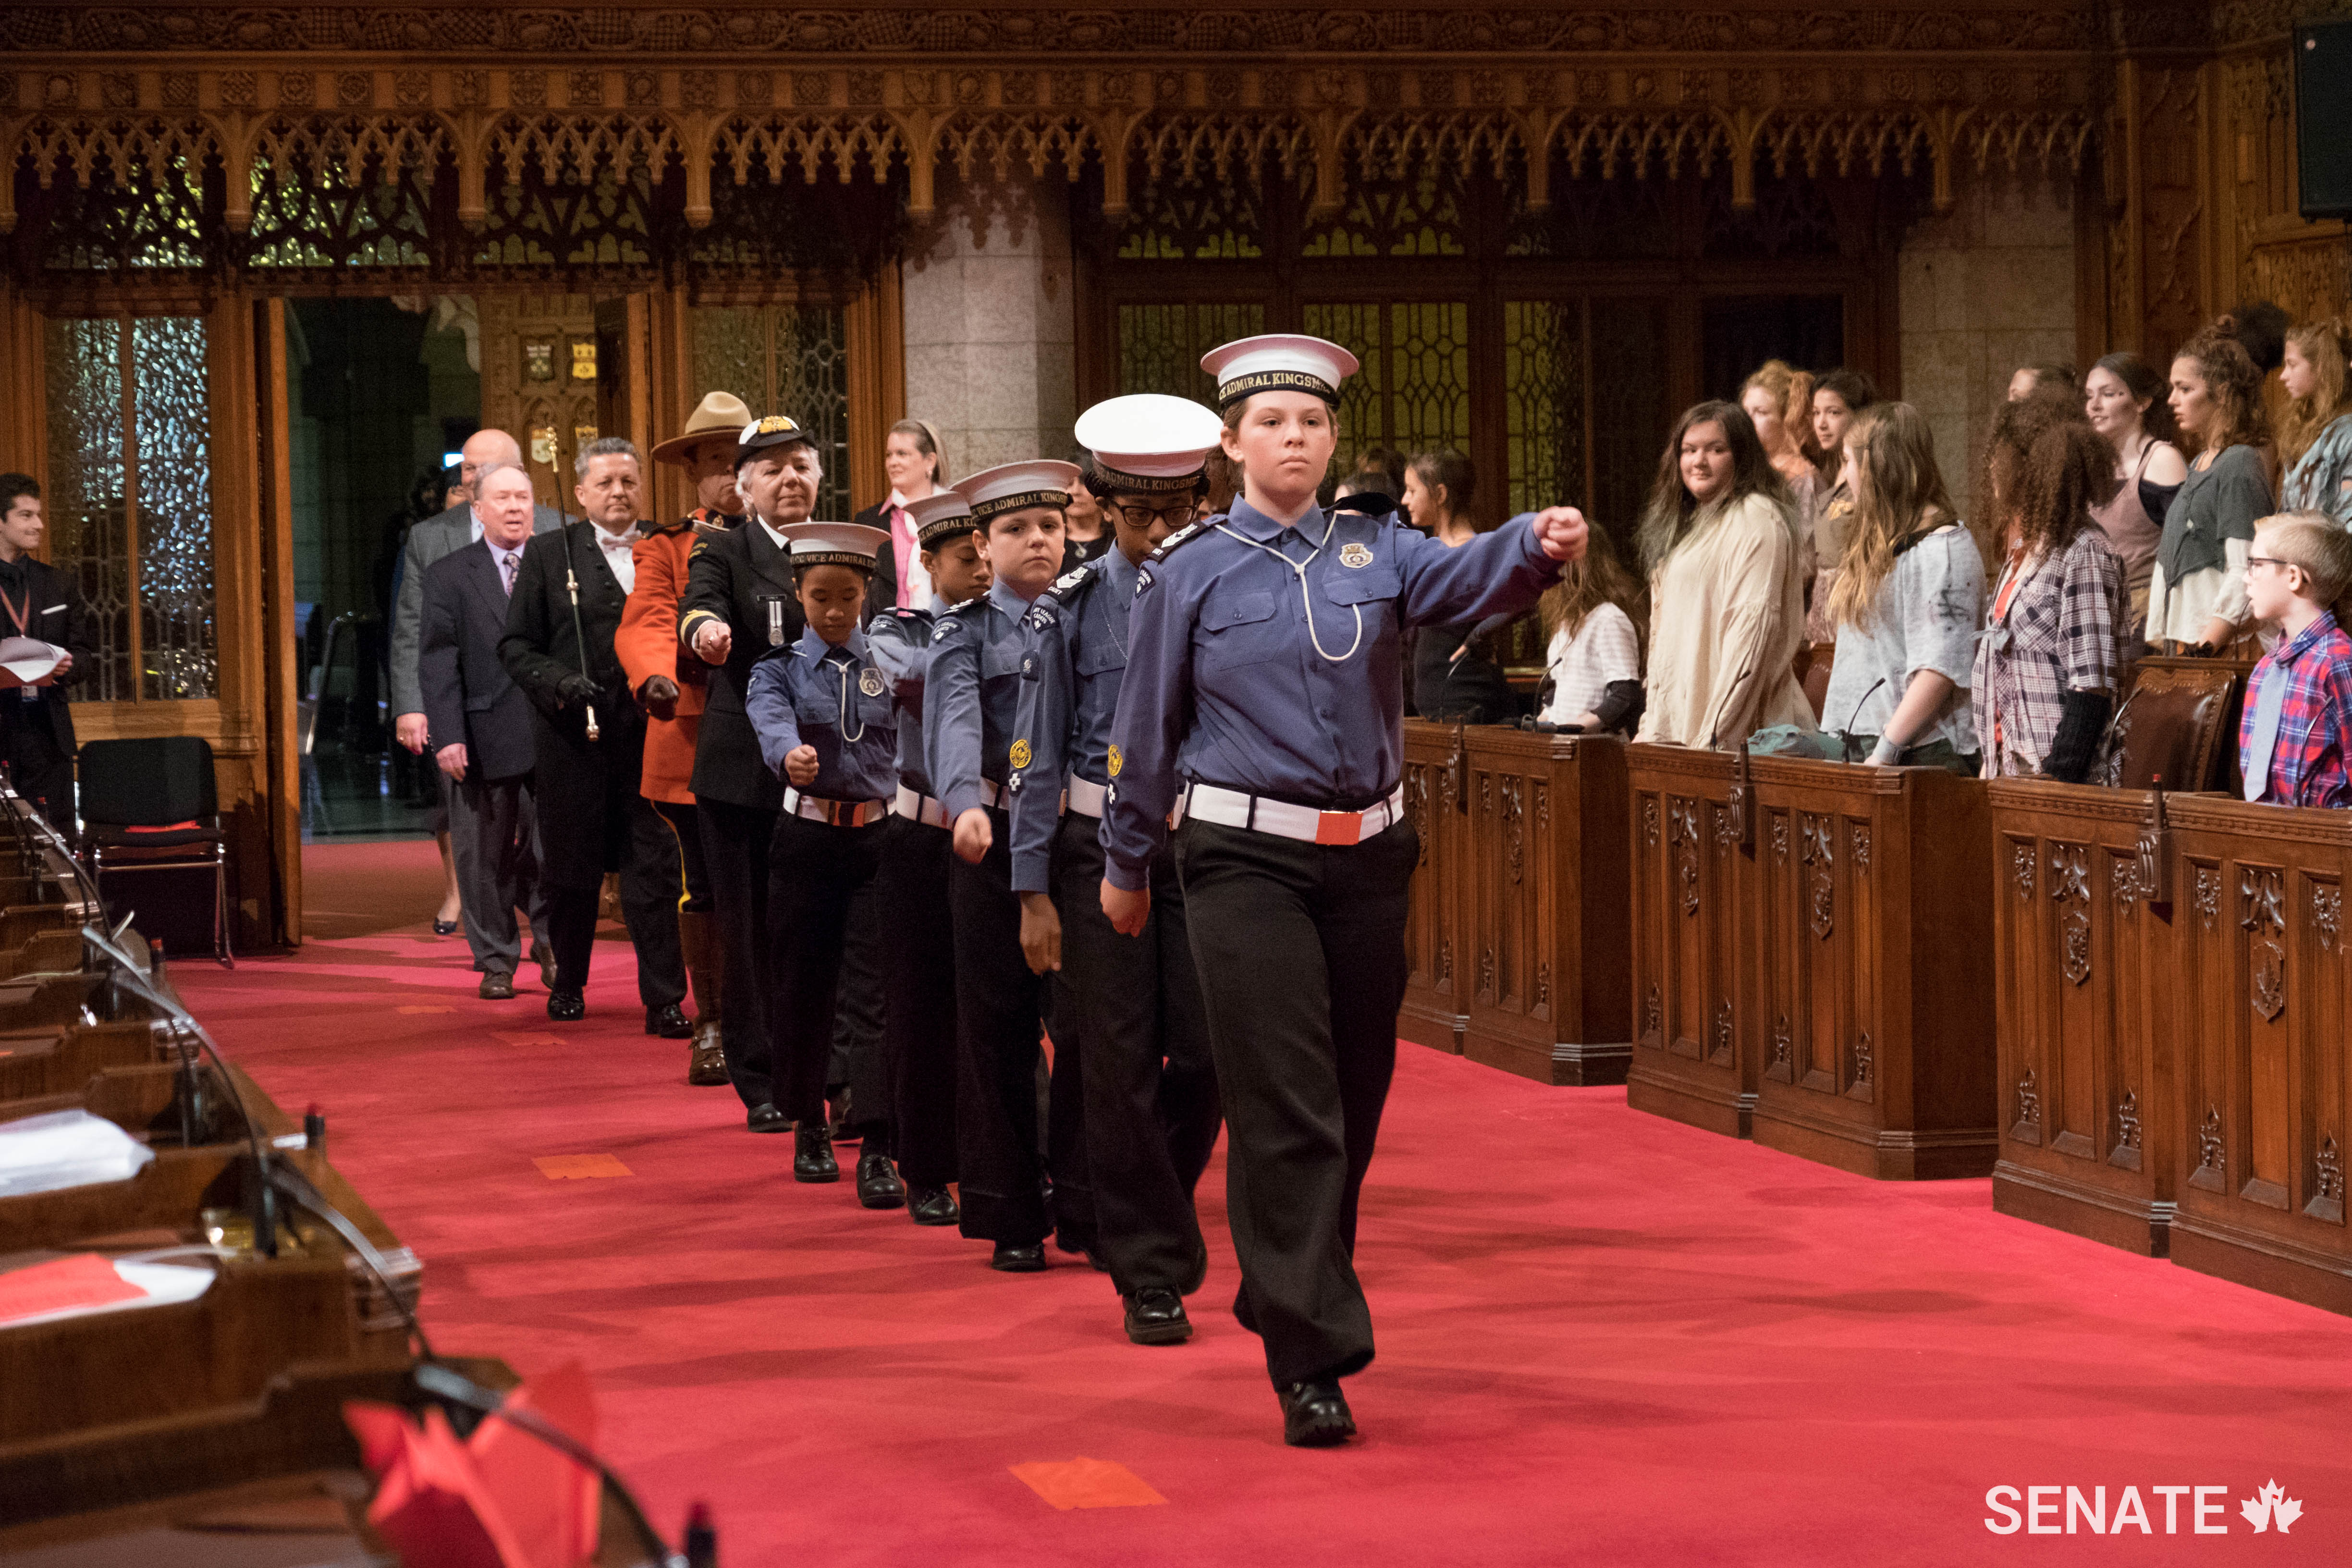 Pictured: Cadets lead the way into the Senate chamber.